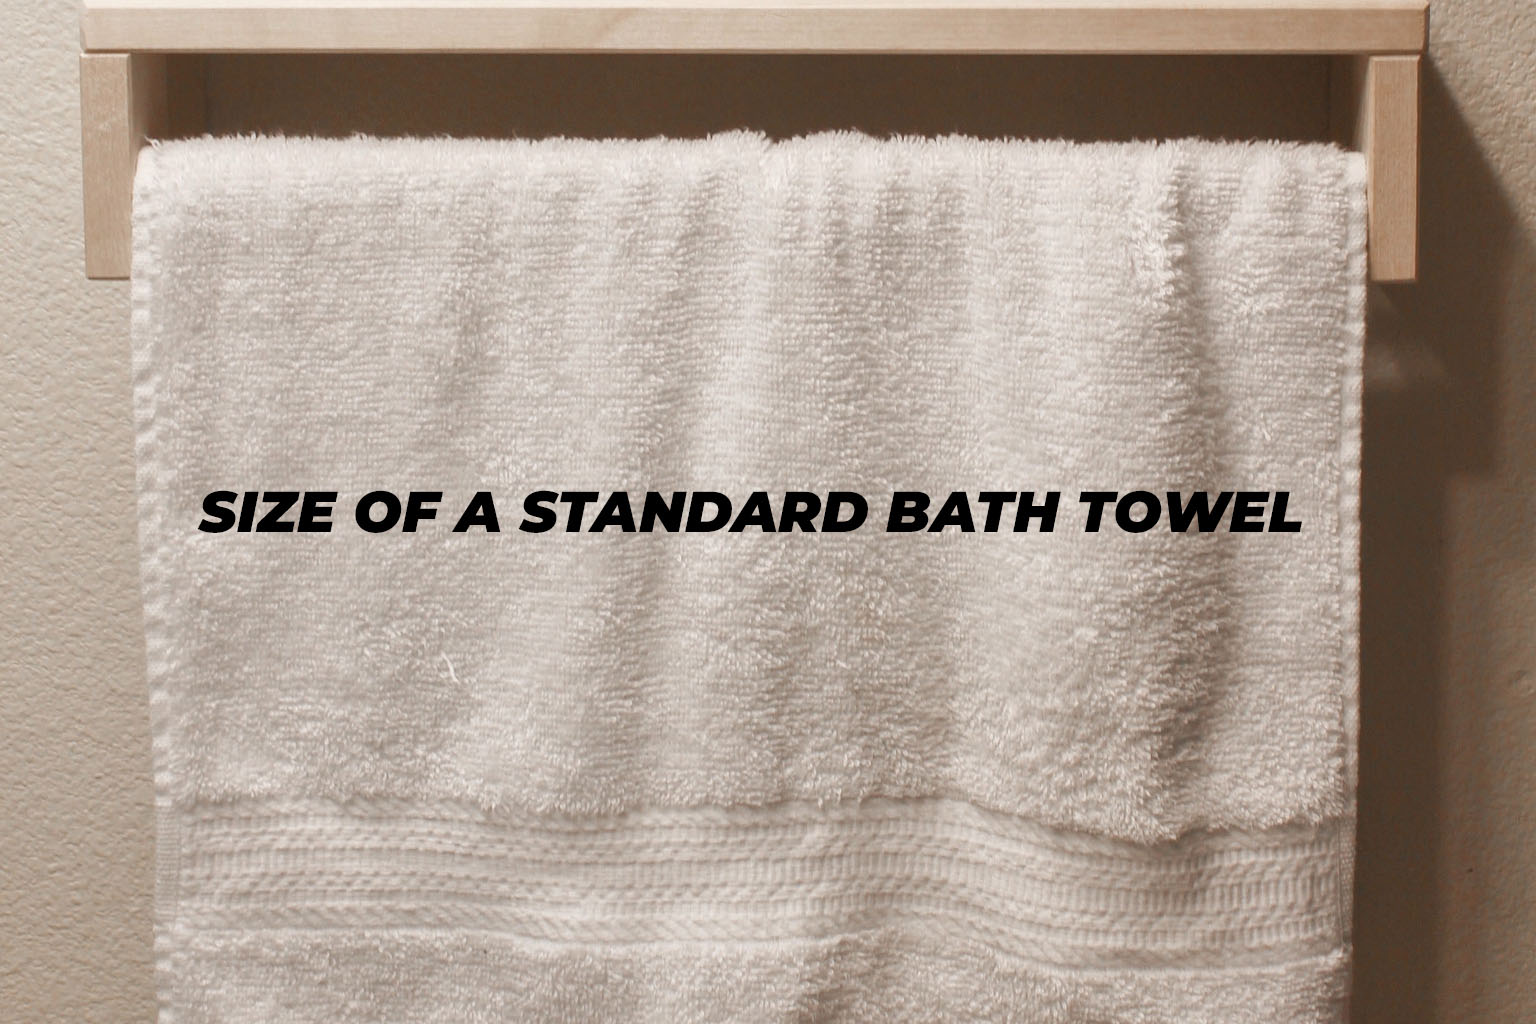 How To Hang Towels On Double Towel Bar? - OraHome